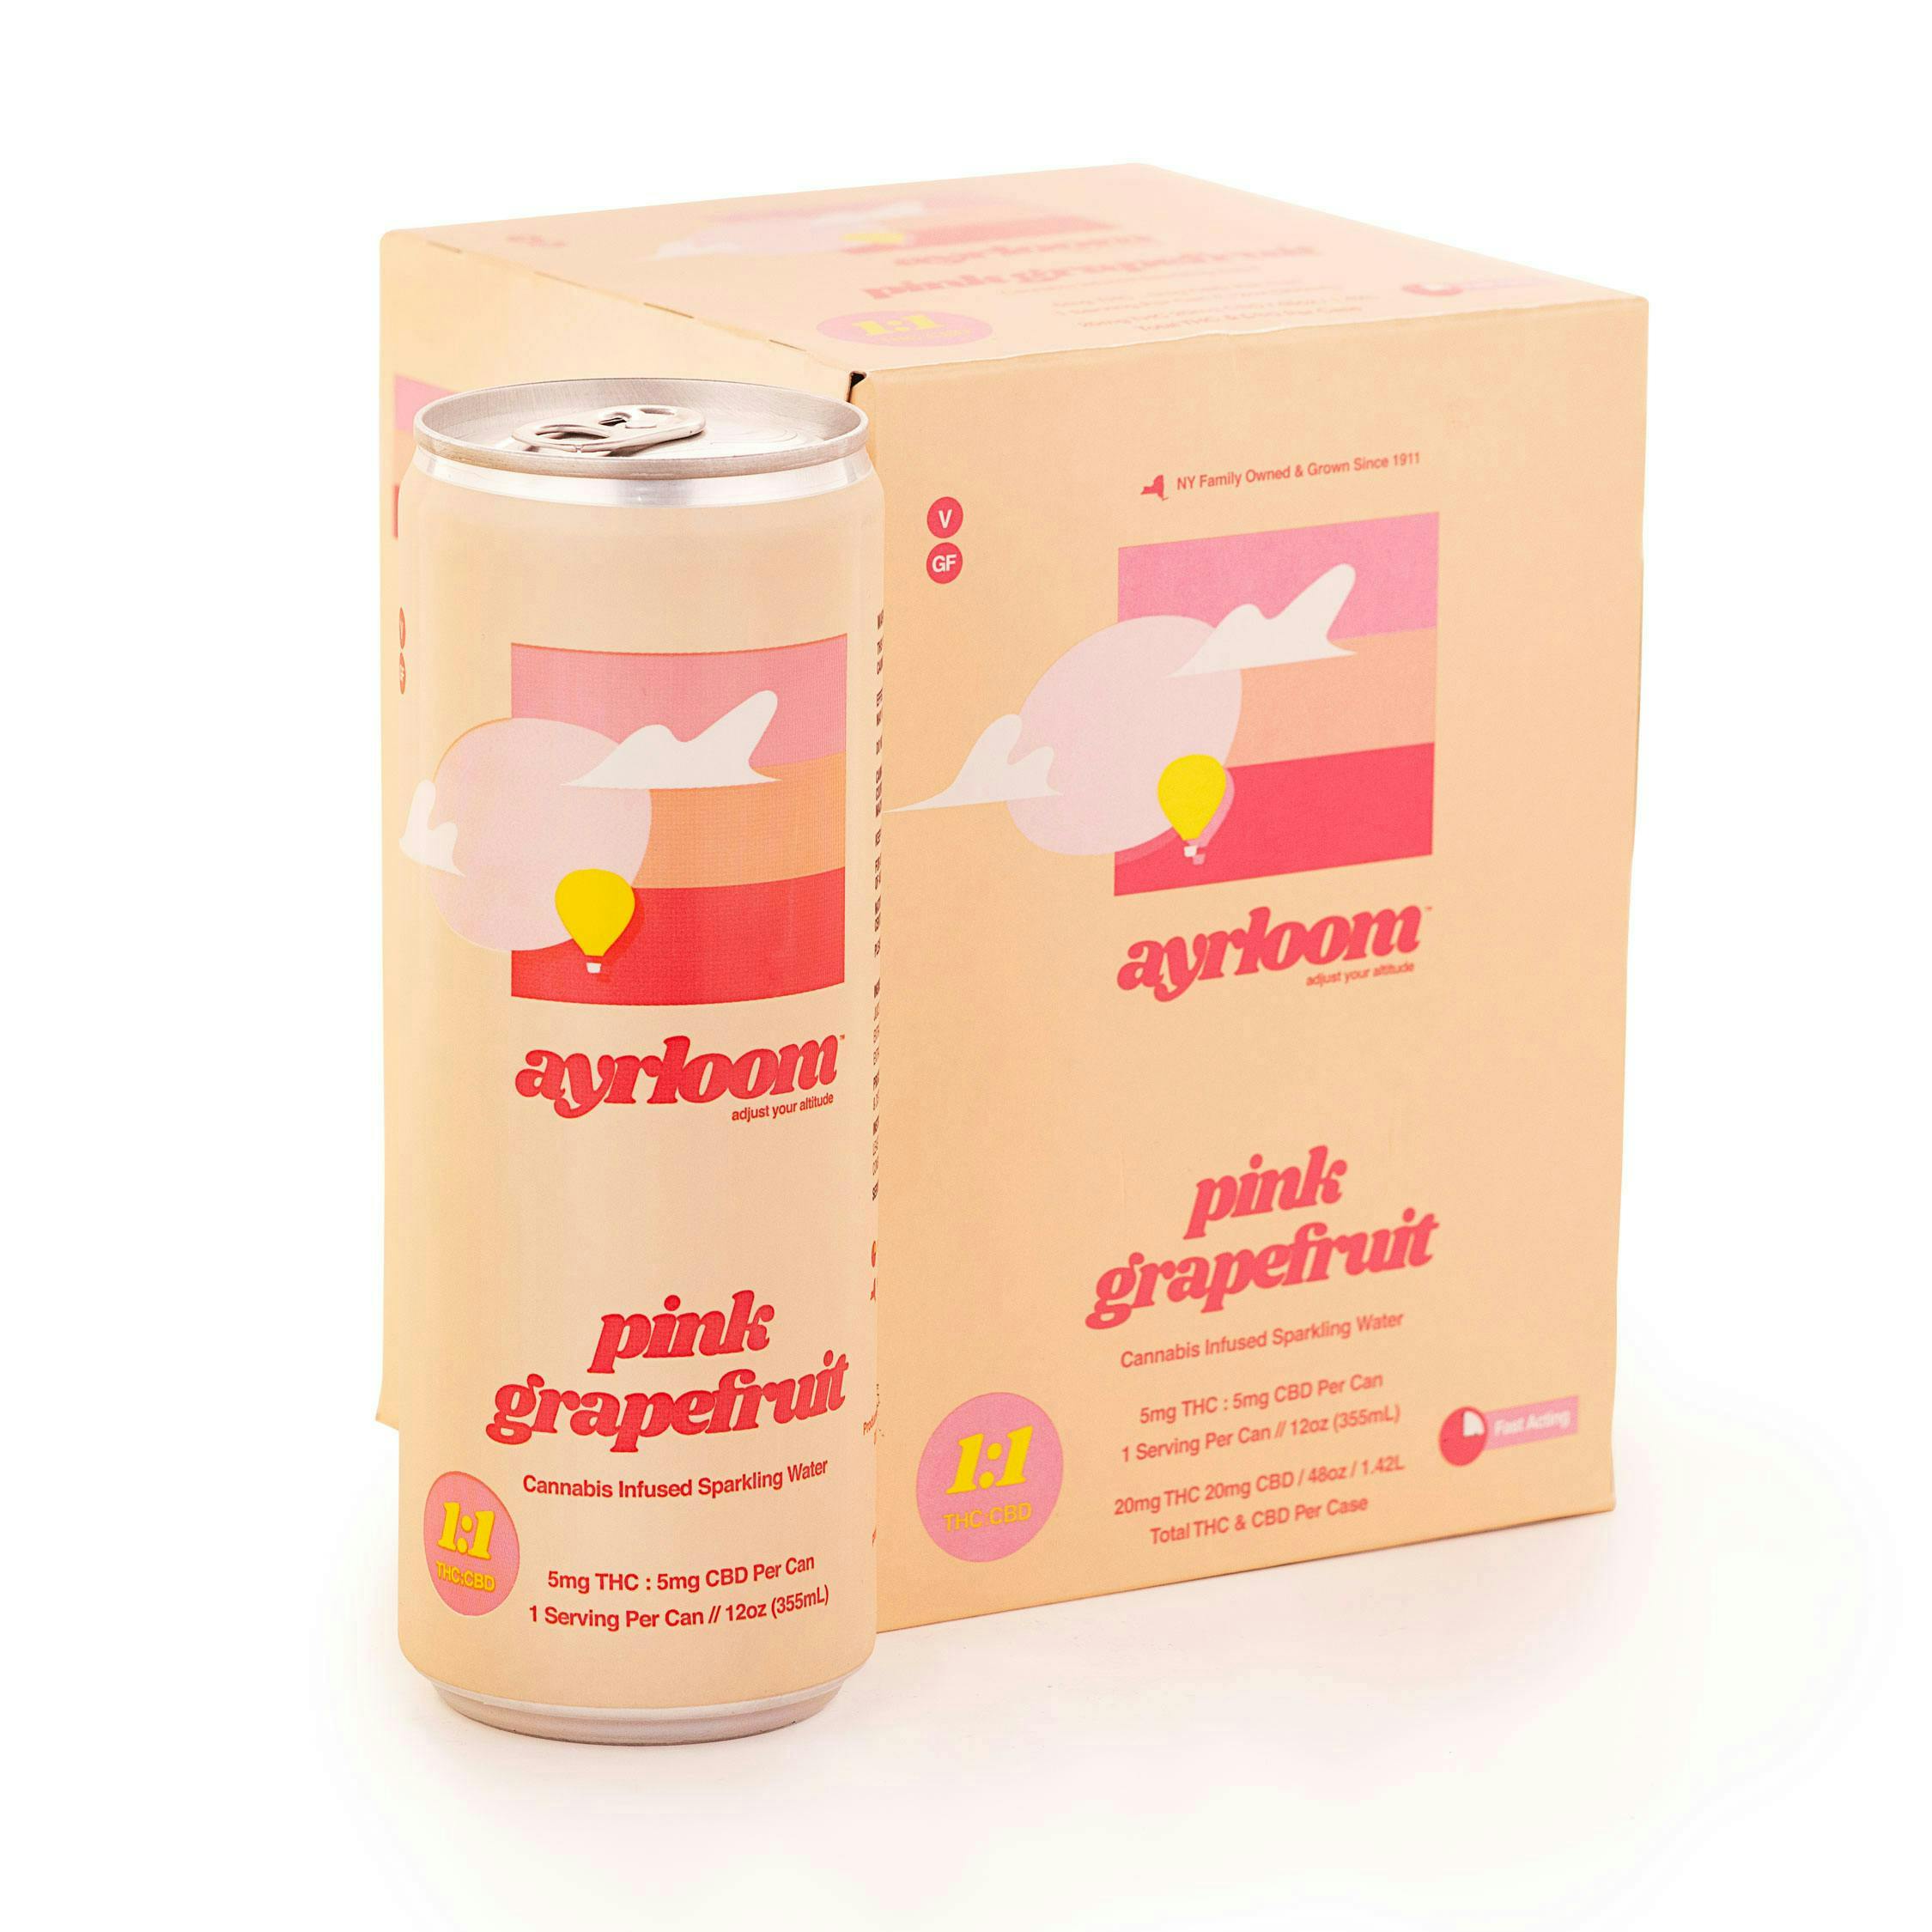 Pink Grapefruit 1:1 Infused Sparkling Water • 4 Pack - ayrloom - EDIBLES - Rockland County Weed Delivery | Treehouse Cannabis